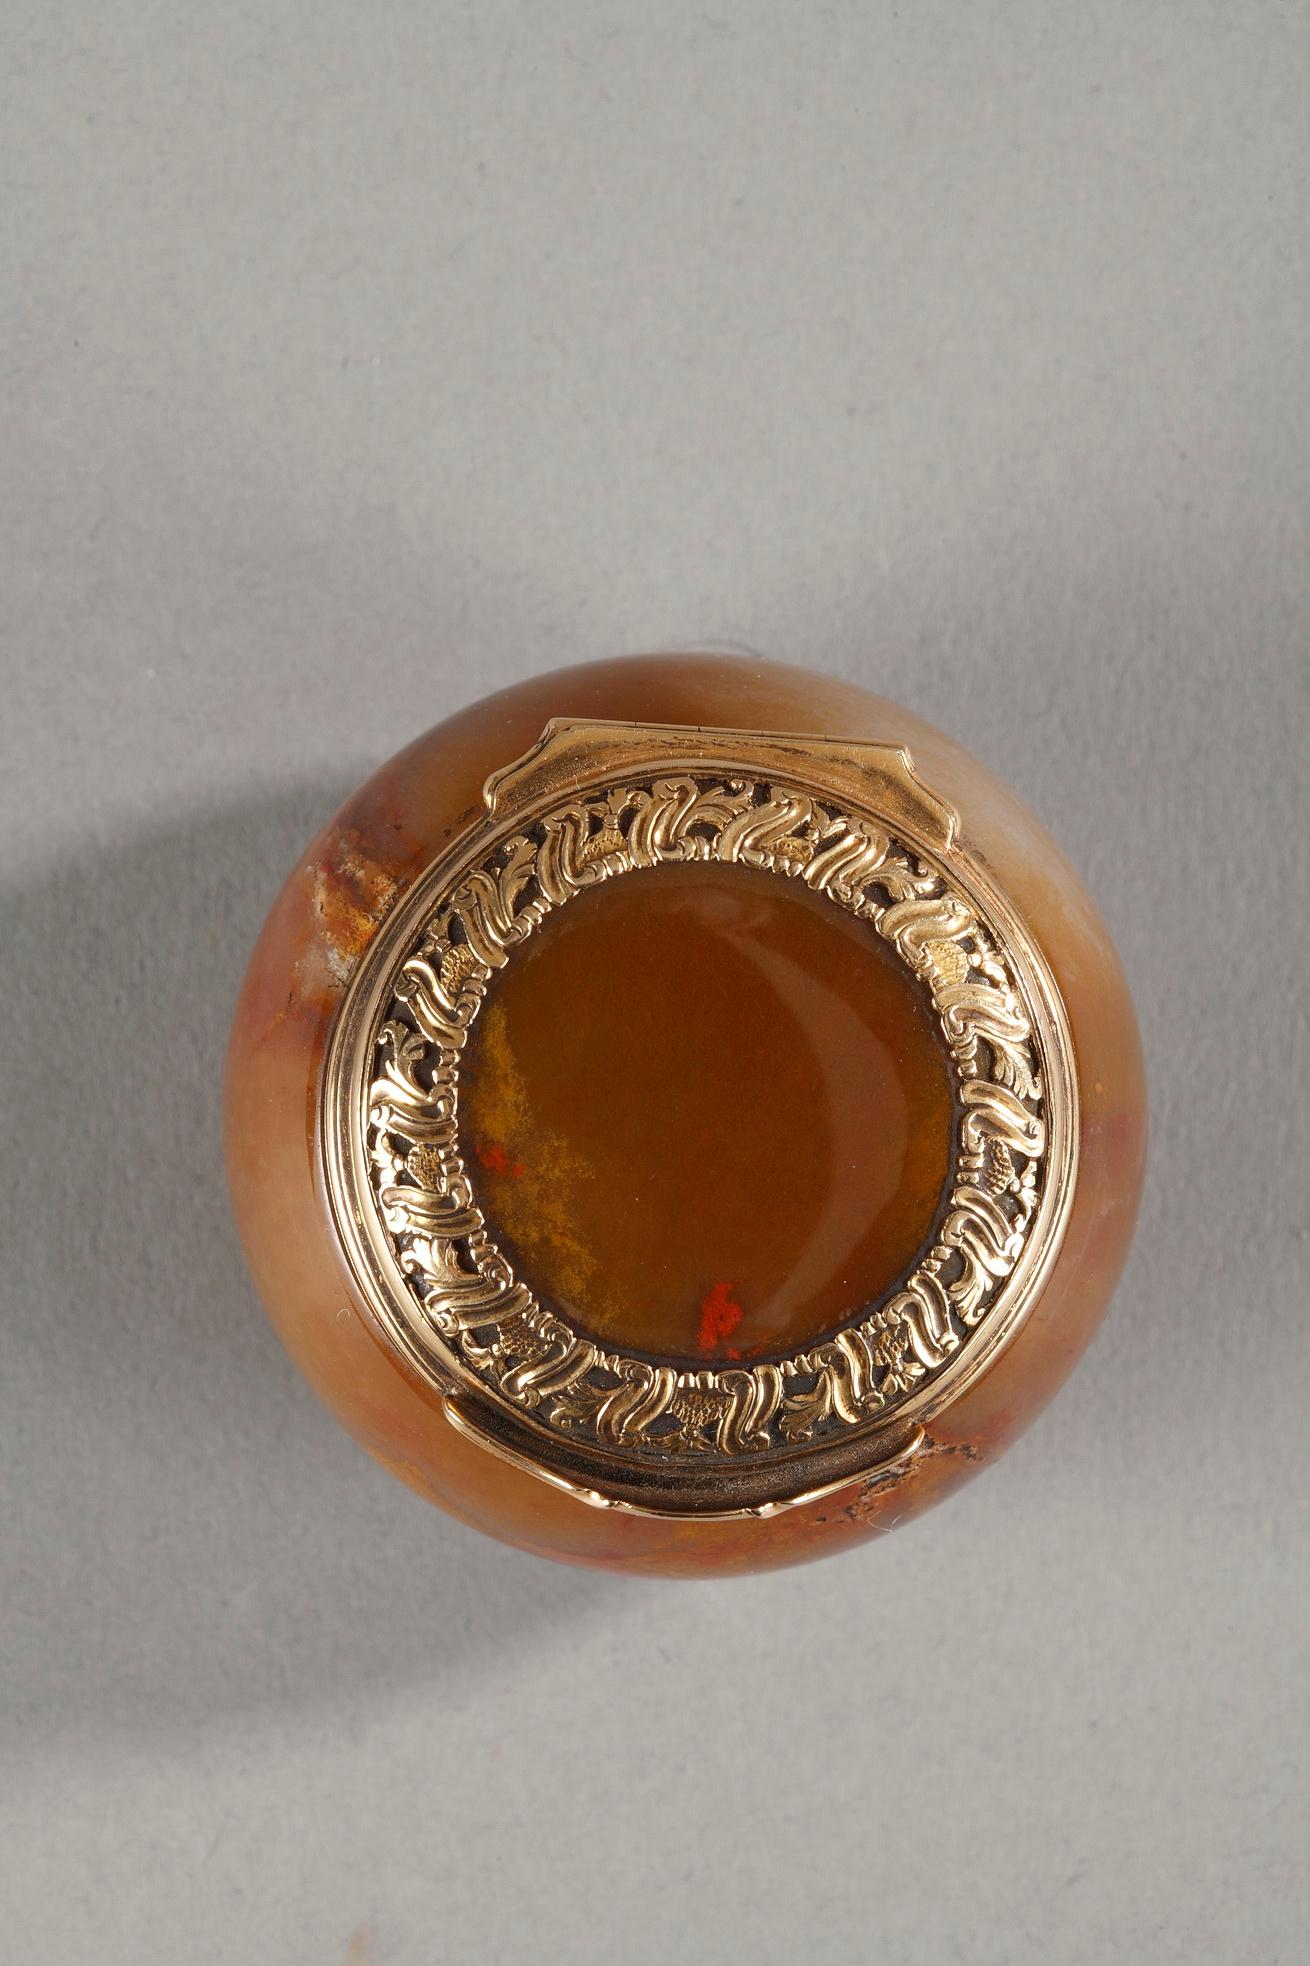 Agate box or snuff-box in of circular form with gently bombé sides, the gold mounted lid is chased with scrollwork.
Probably Georges II period.
Unmarked gold. Some usual wear, 18th century.
W: 1.94oz (55g).
Measures: L 1.57in. (4.5 cm) / l